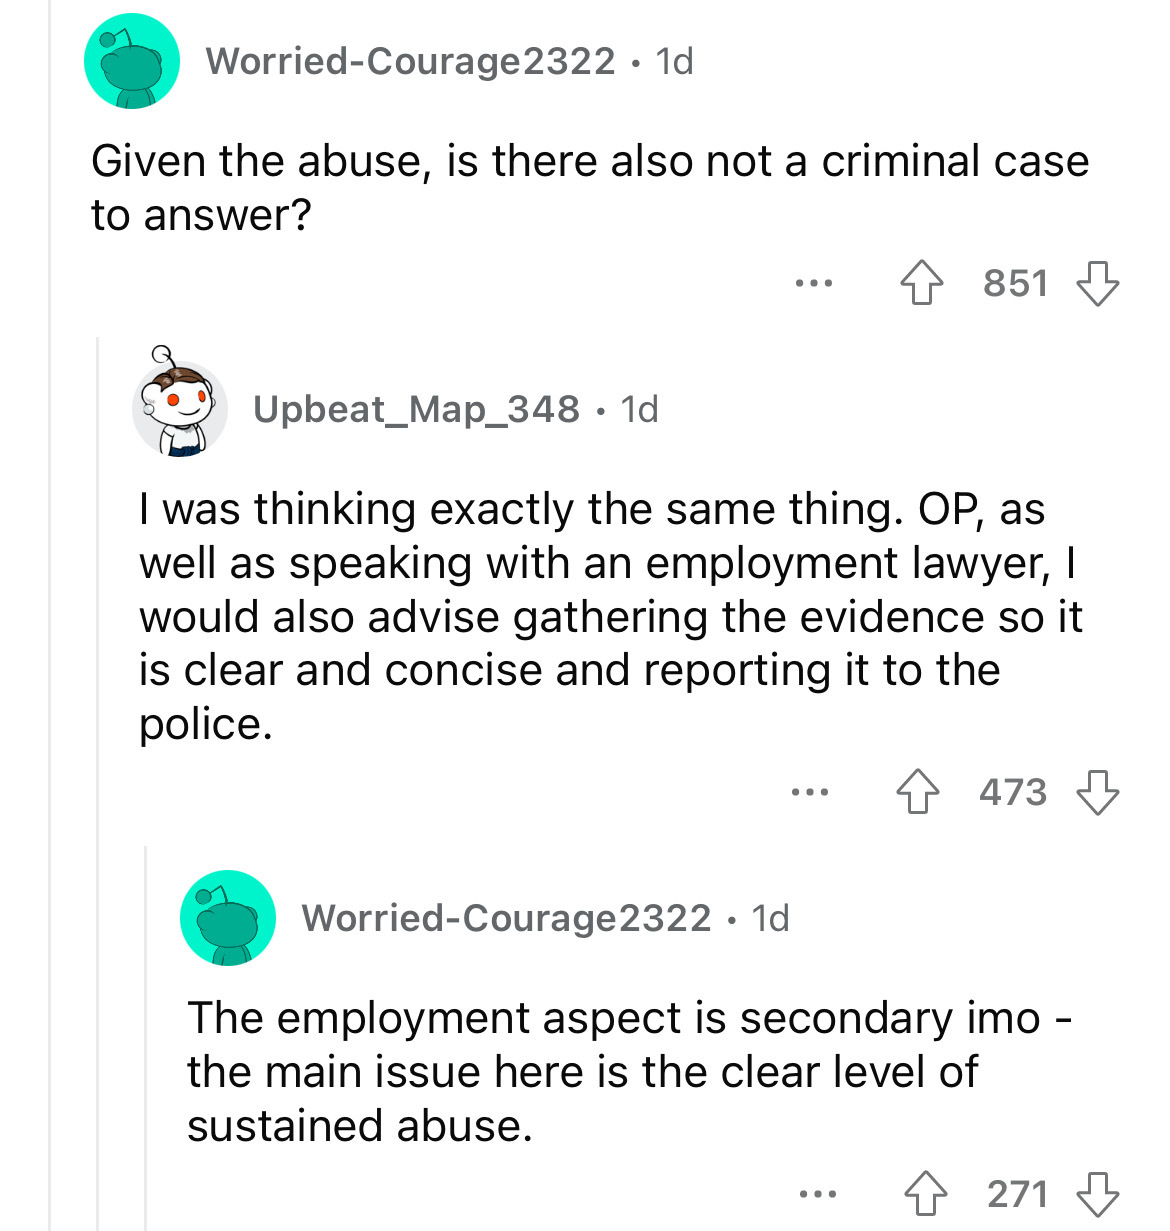 angle - WorriedCourage2322. 1d Given the abuse, is there also not a criminal case to answer? ... 851 Upbeat_Map_348. 1d I was thinking exactly the same thing. Op, as well as speaking with an employment lawyer, I would also advise gathering the evidence so